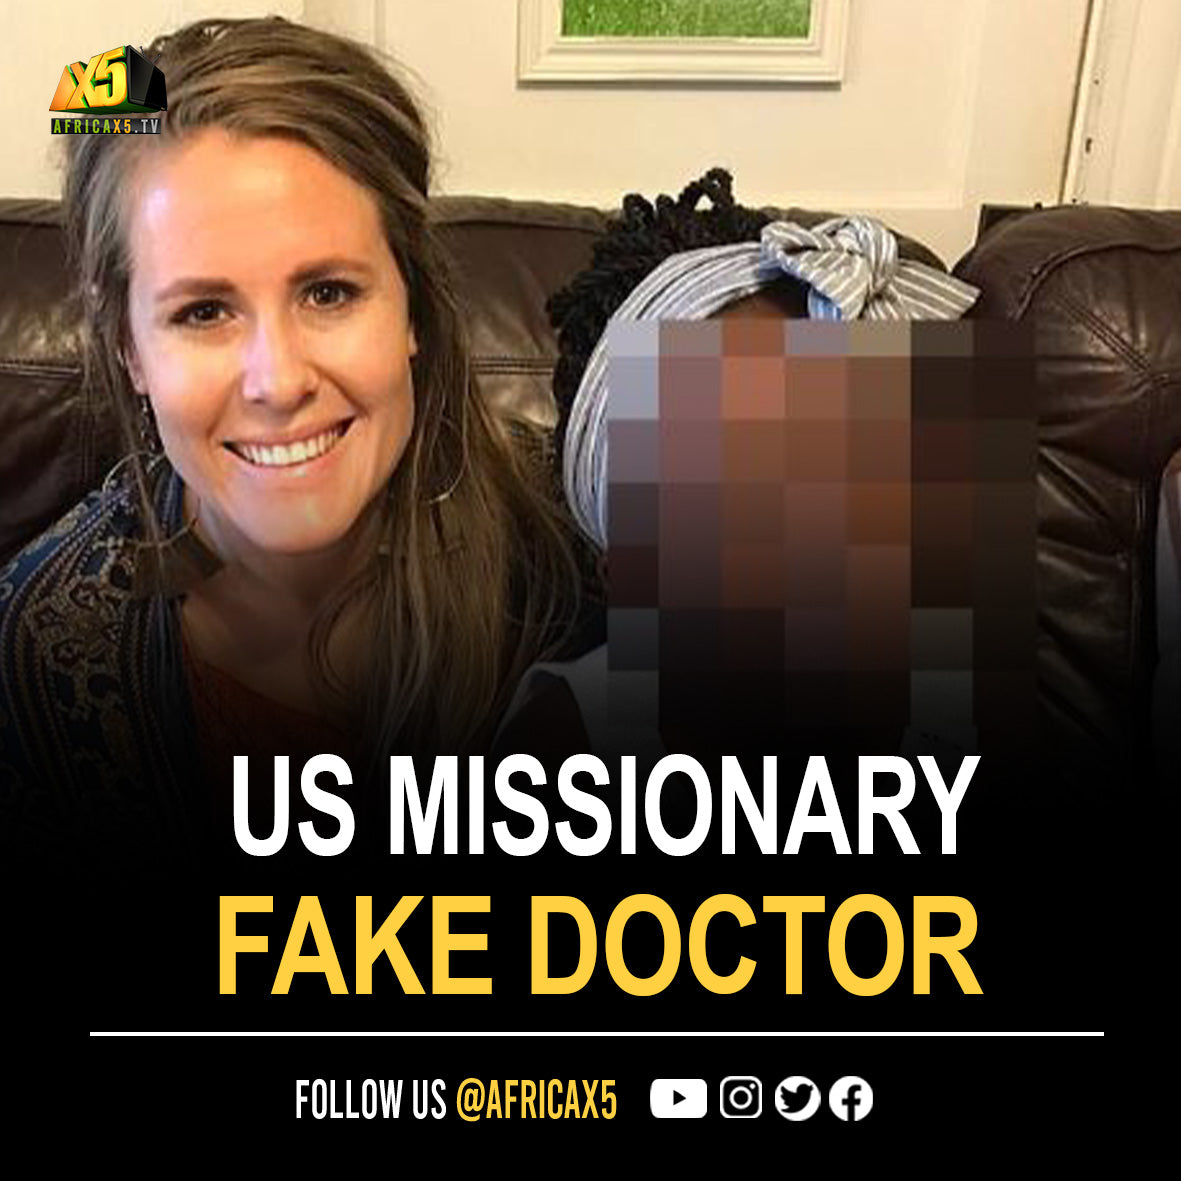 A US missionary with no medical qualifications caused the deaths of more than 100 babies while posing as a doctor in Uganda